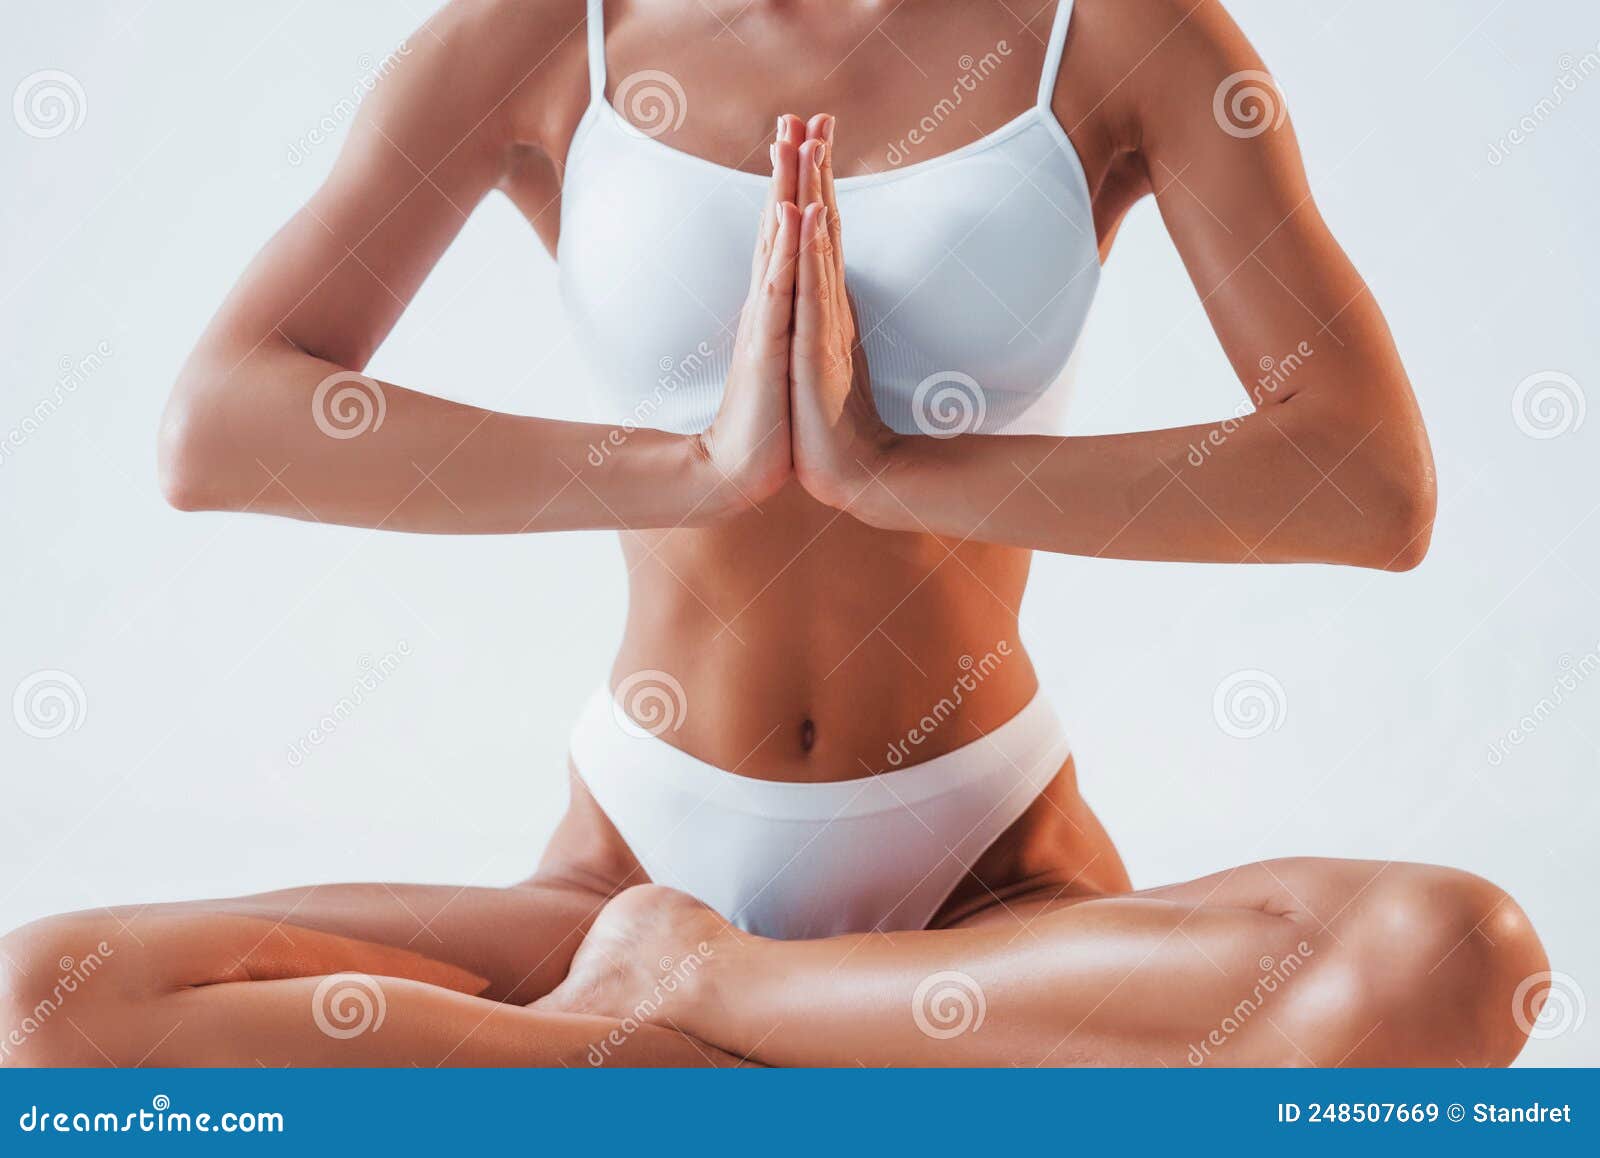 Practicing Yoga Exercises. Beautiful Woman with Slim Body in Underwear is  in the Studio Stock Image - Image of clear, beautiful: 248507669